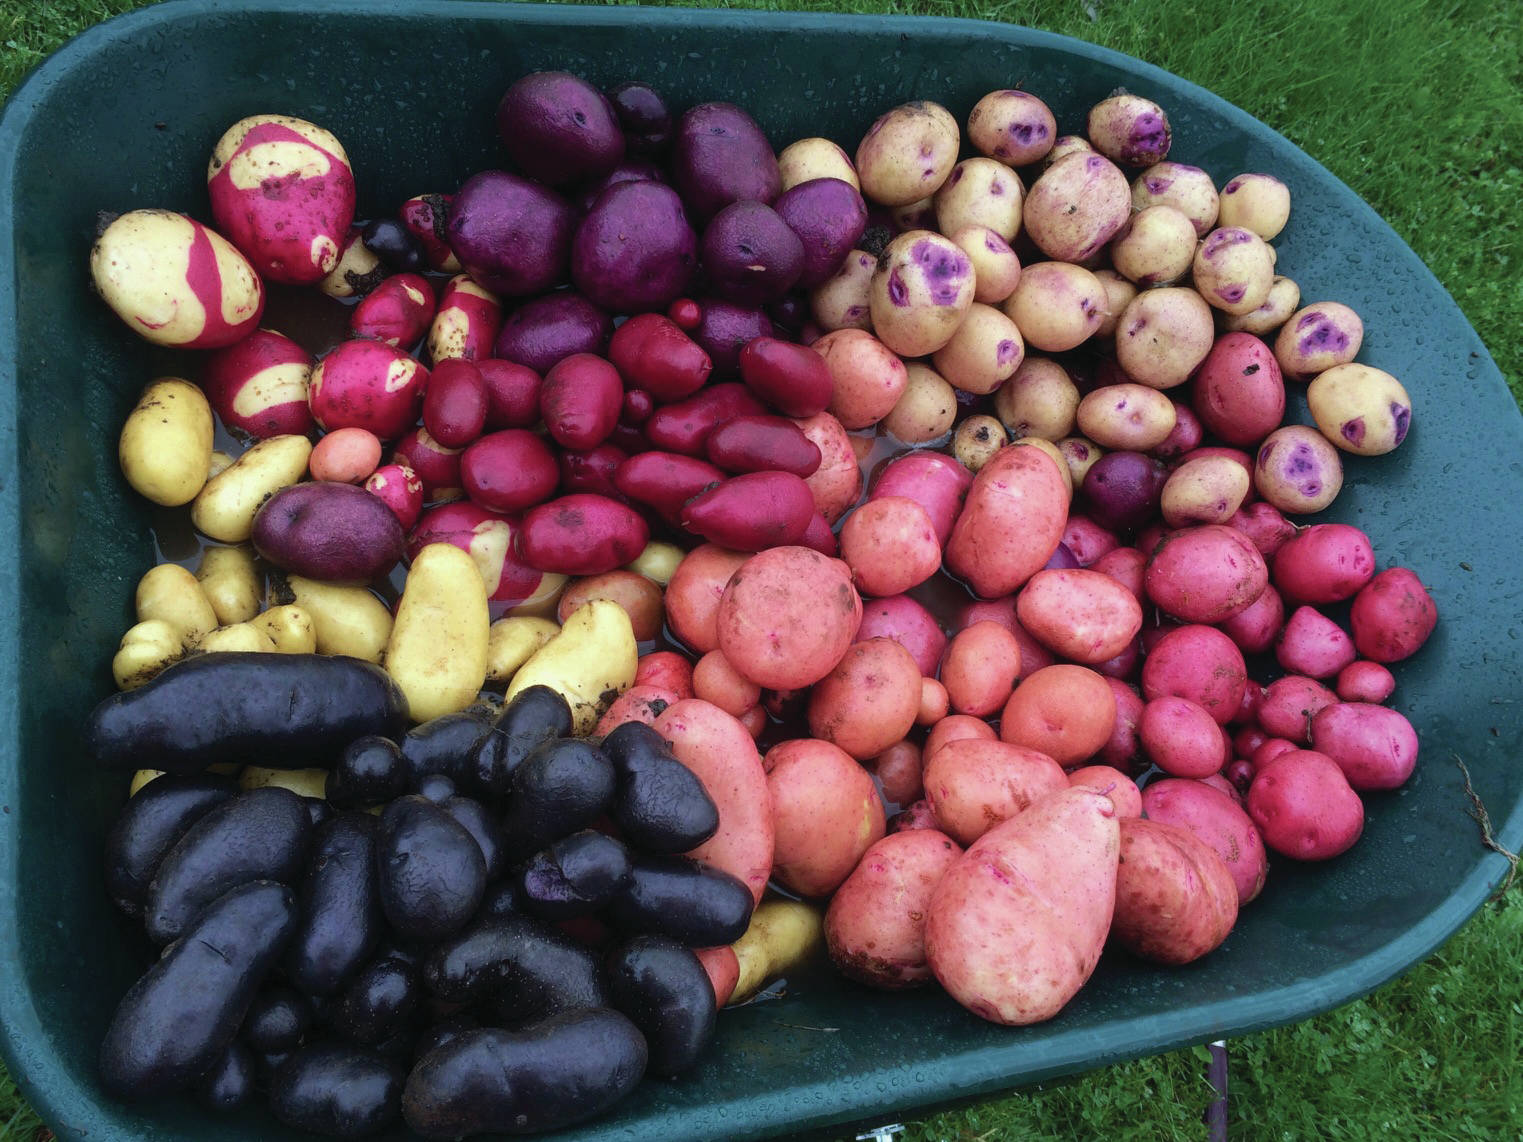 Photo by Rosemary Fitzpatrick                                 Jane Wiebe’s wheelbarrow of lovely tubers will cause any potato aficionado’s heart to sing. The photo was taken on Oct. 7 in Homer.